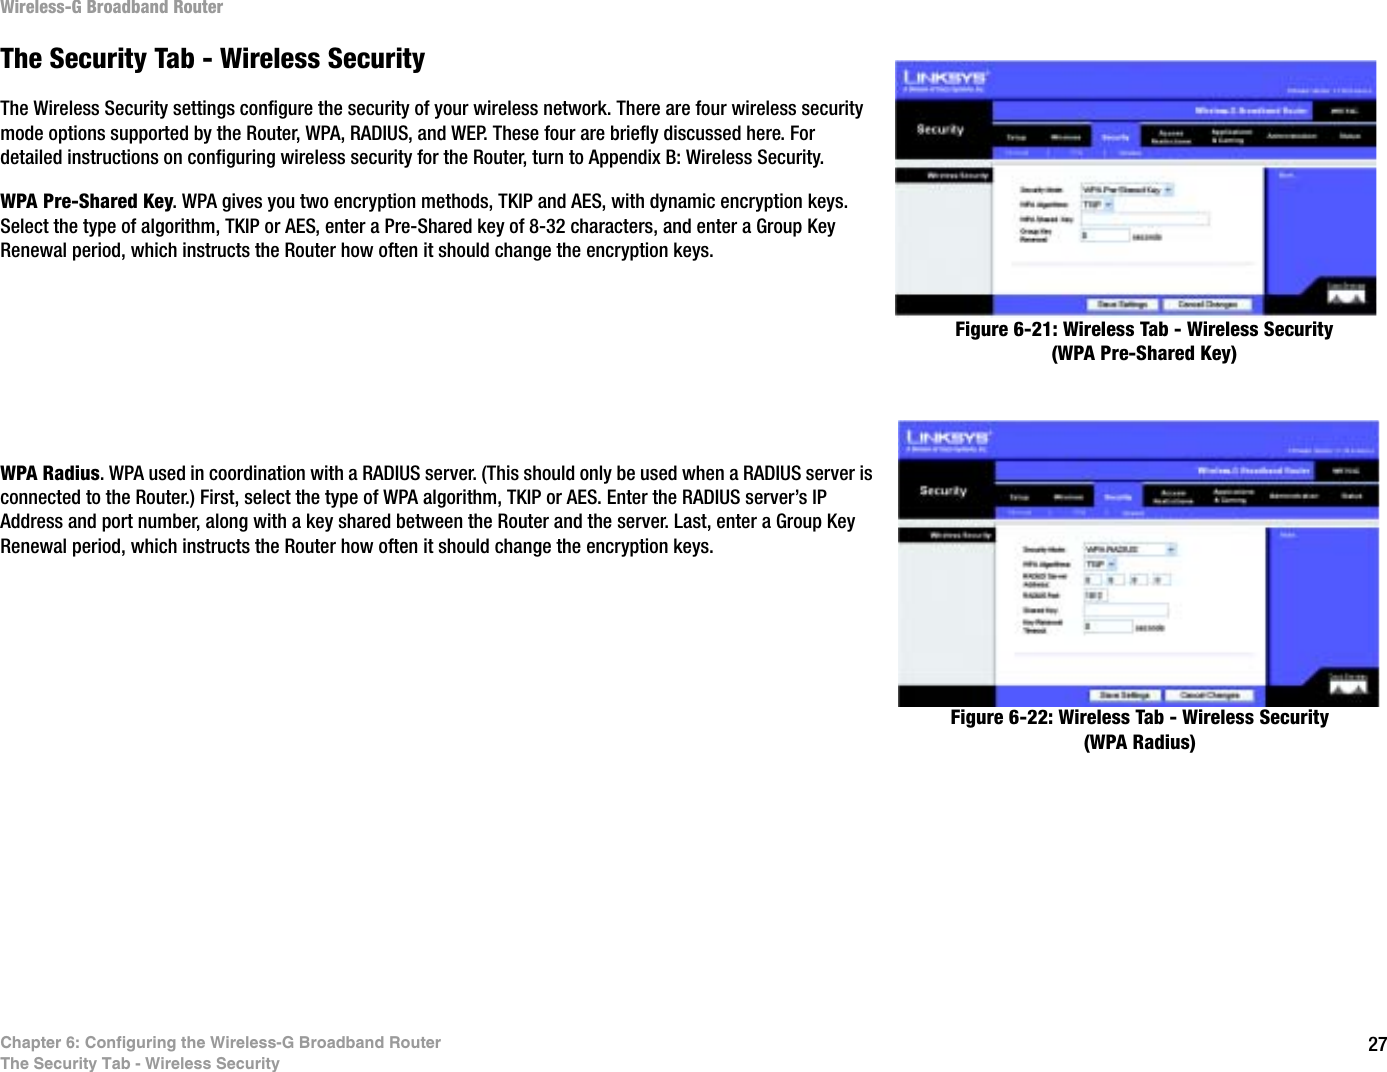 27Chapter 6: Configuring the Wireless-G Broadband RouterThe Security Tab - Wireless SecurityWireless-G Broadband RouterThe Security Tab - Wireless SecurityThe Wireless Security settings configure the security of your wireless network. There are four wireless security mode options supported by the Router, WPA, RADIUS, and WEP. These four are briefly discussed here. For detailed instructions on configuring wireless security for the Router, turn to Appendix B: Wireless Security.WPA Pre-Shared Key. WPA gives you two encryption methods, TKIP and AES, with dynamic encryption keys. Select the type of algorithm, TKIP or AES, enter a Pre-Shared key of 8-32 characters, and enter a Group Key Renewal period, which instructs the Router how often it should change the encryption keys.WPA Radius. WPA used in coordination with a RADIUS server. (This should only be used when a RADIUS server is connected to the Router.) First, select the type of WPA algorithm, TKIP or AES. Enter the RADIUS server’s IP Address and port number, along with a key shared between the Router and the server. Last, enter a Group Key Renewal period, which instructs the Router how often it should change the encryption keys.Figure 6-21: Wireless Tab - Wireless Security (WPA Pre-Shared Key)Figure 6-22: Wireless Tab - Wireless Security (WPA Radius)